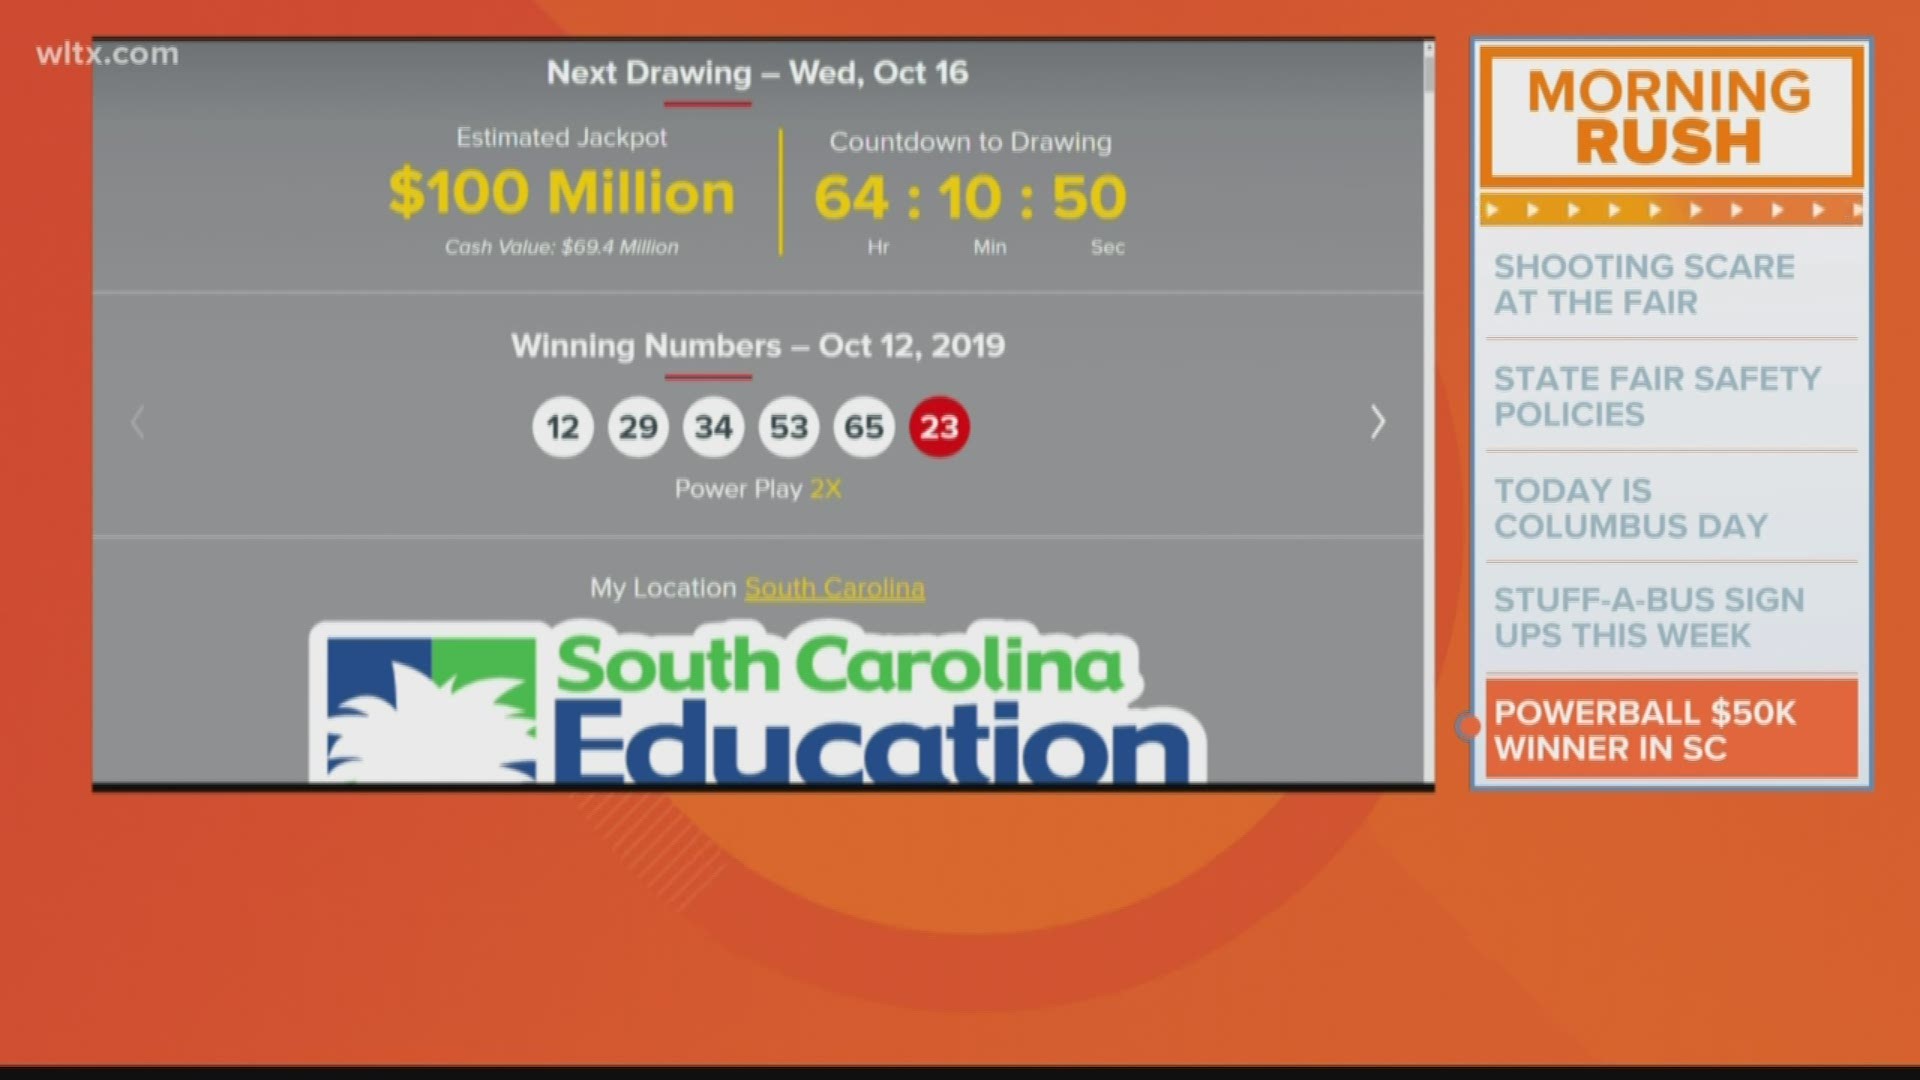 One lucky person in the Palmetto State has won $50,000 in the powerball lottery.